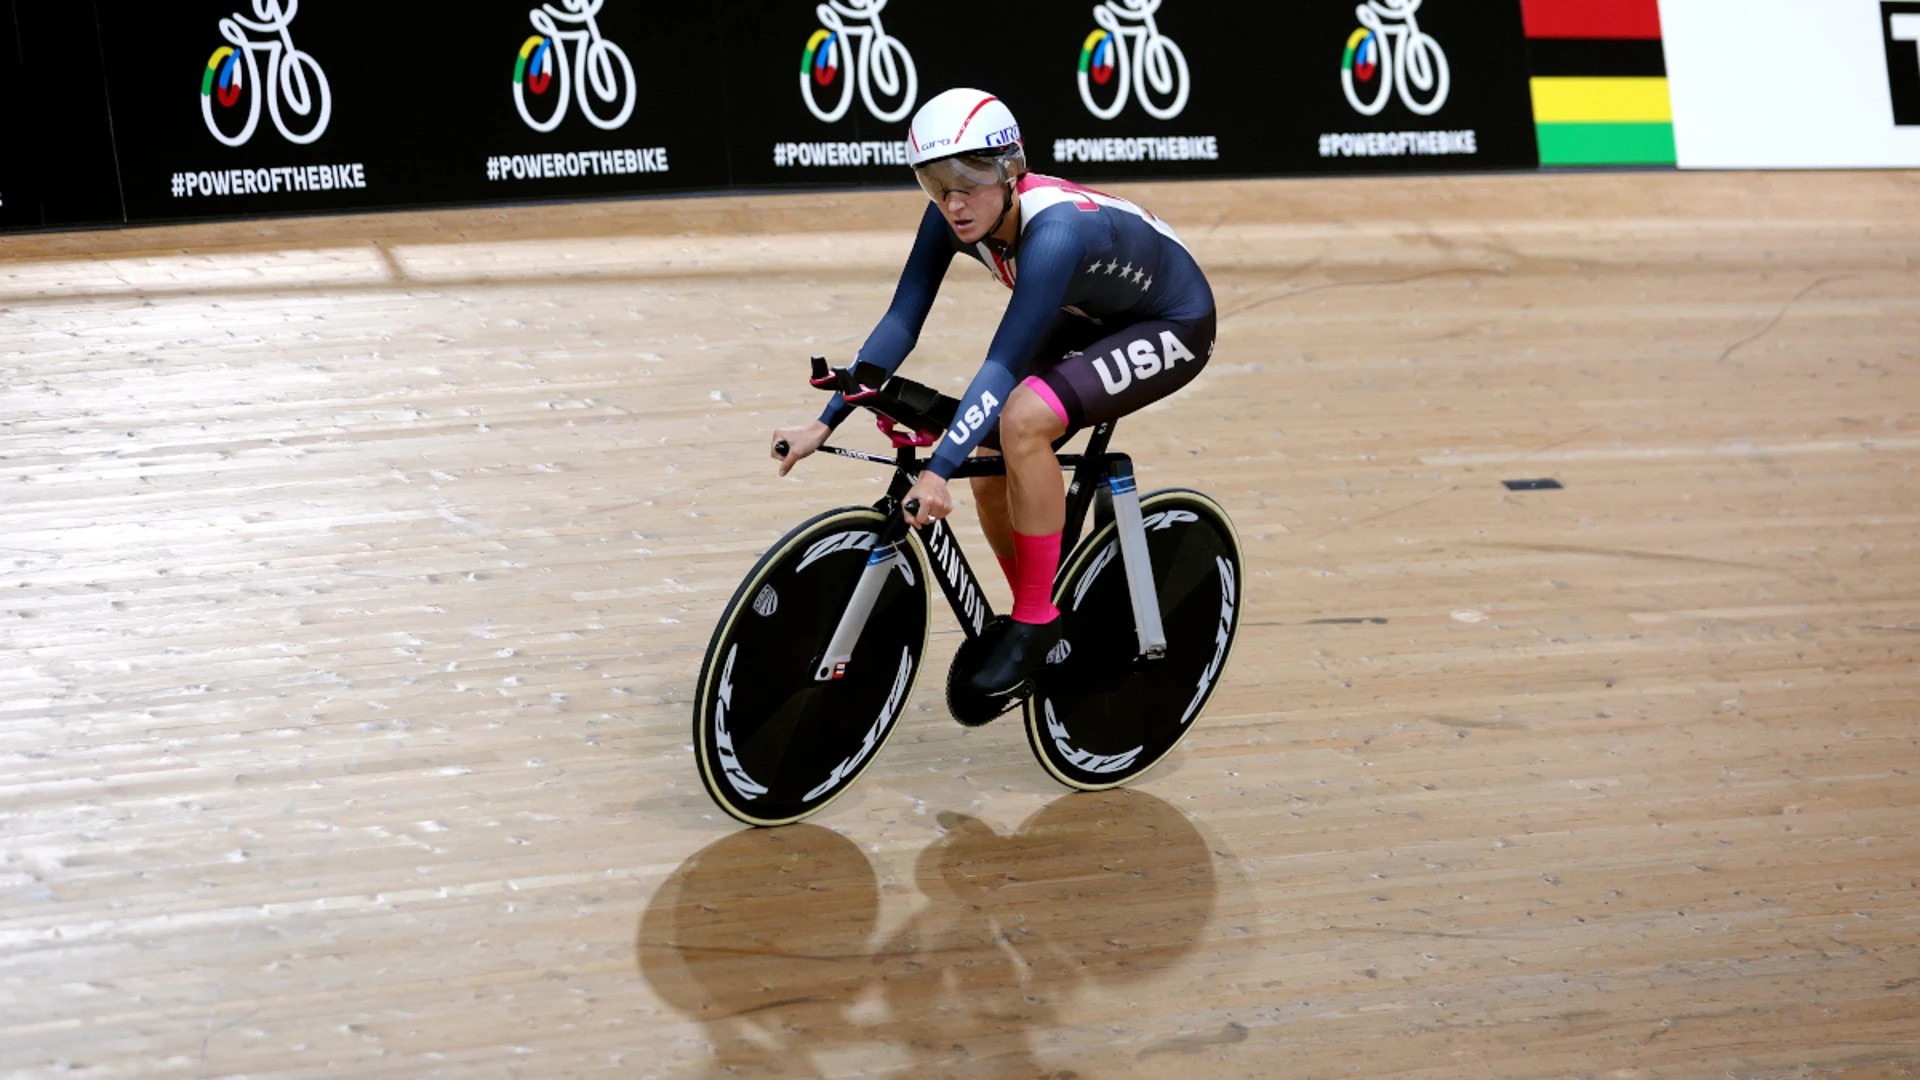 Dygert, Tarling among favourites for Olympic gold on streets of Paris